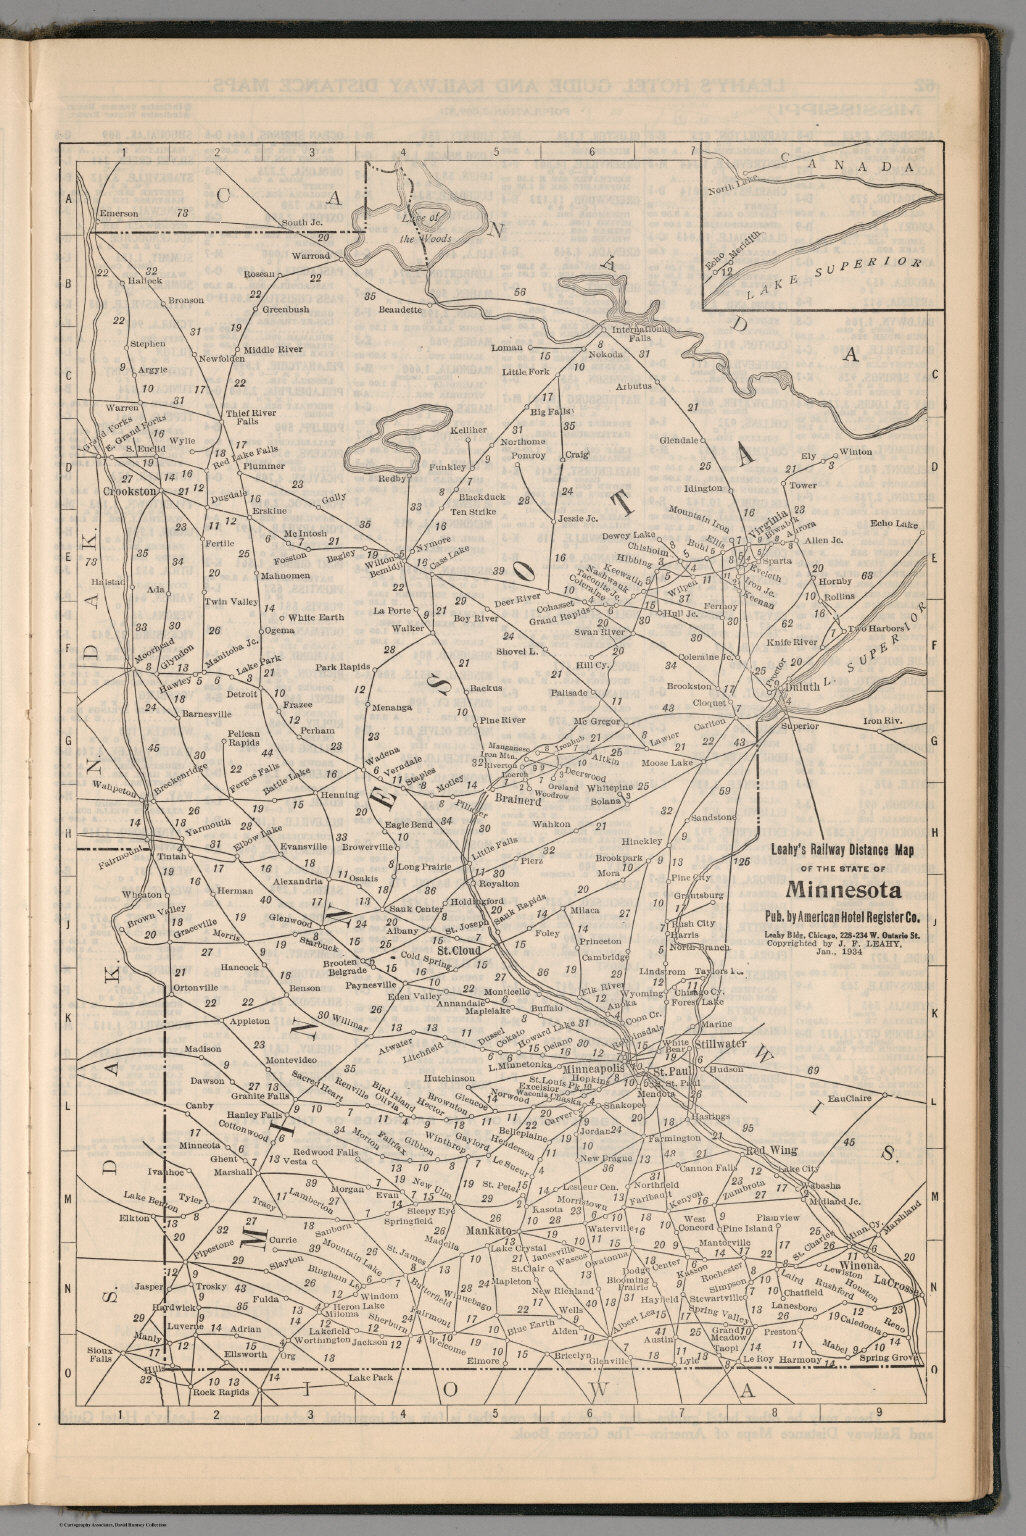 Continues Railway Distance Map Of The State Of Minnesota David